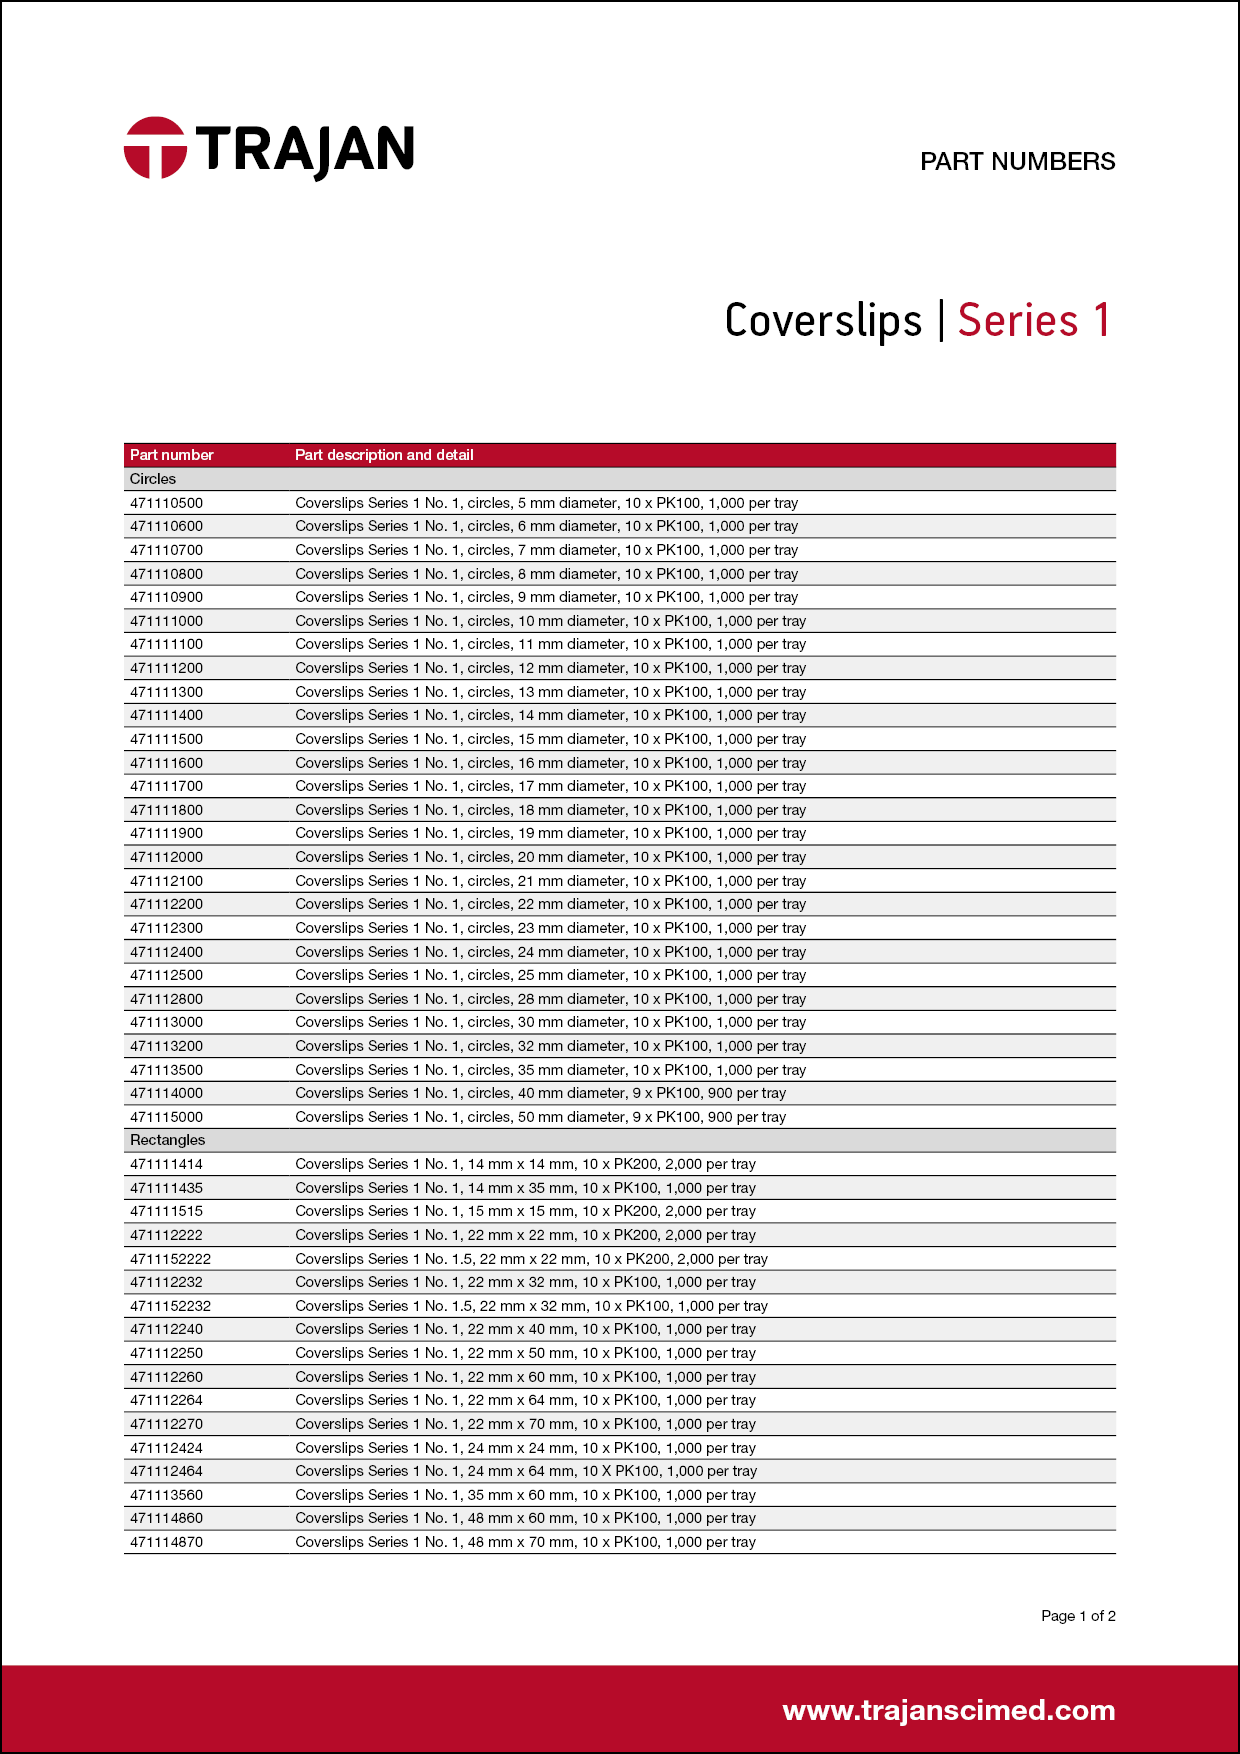 Part Number List - Series 1 coverslips